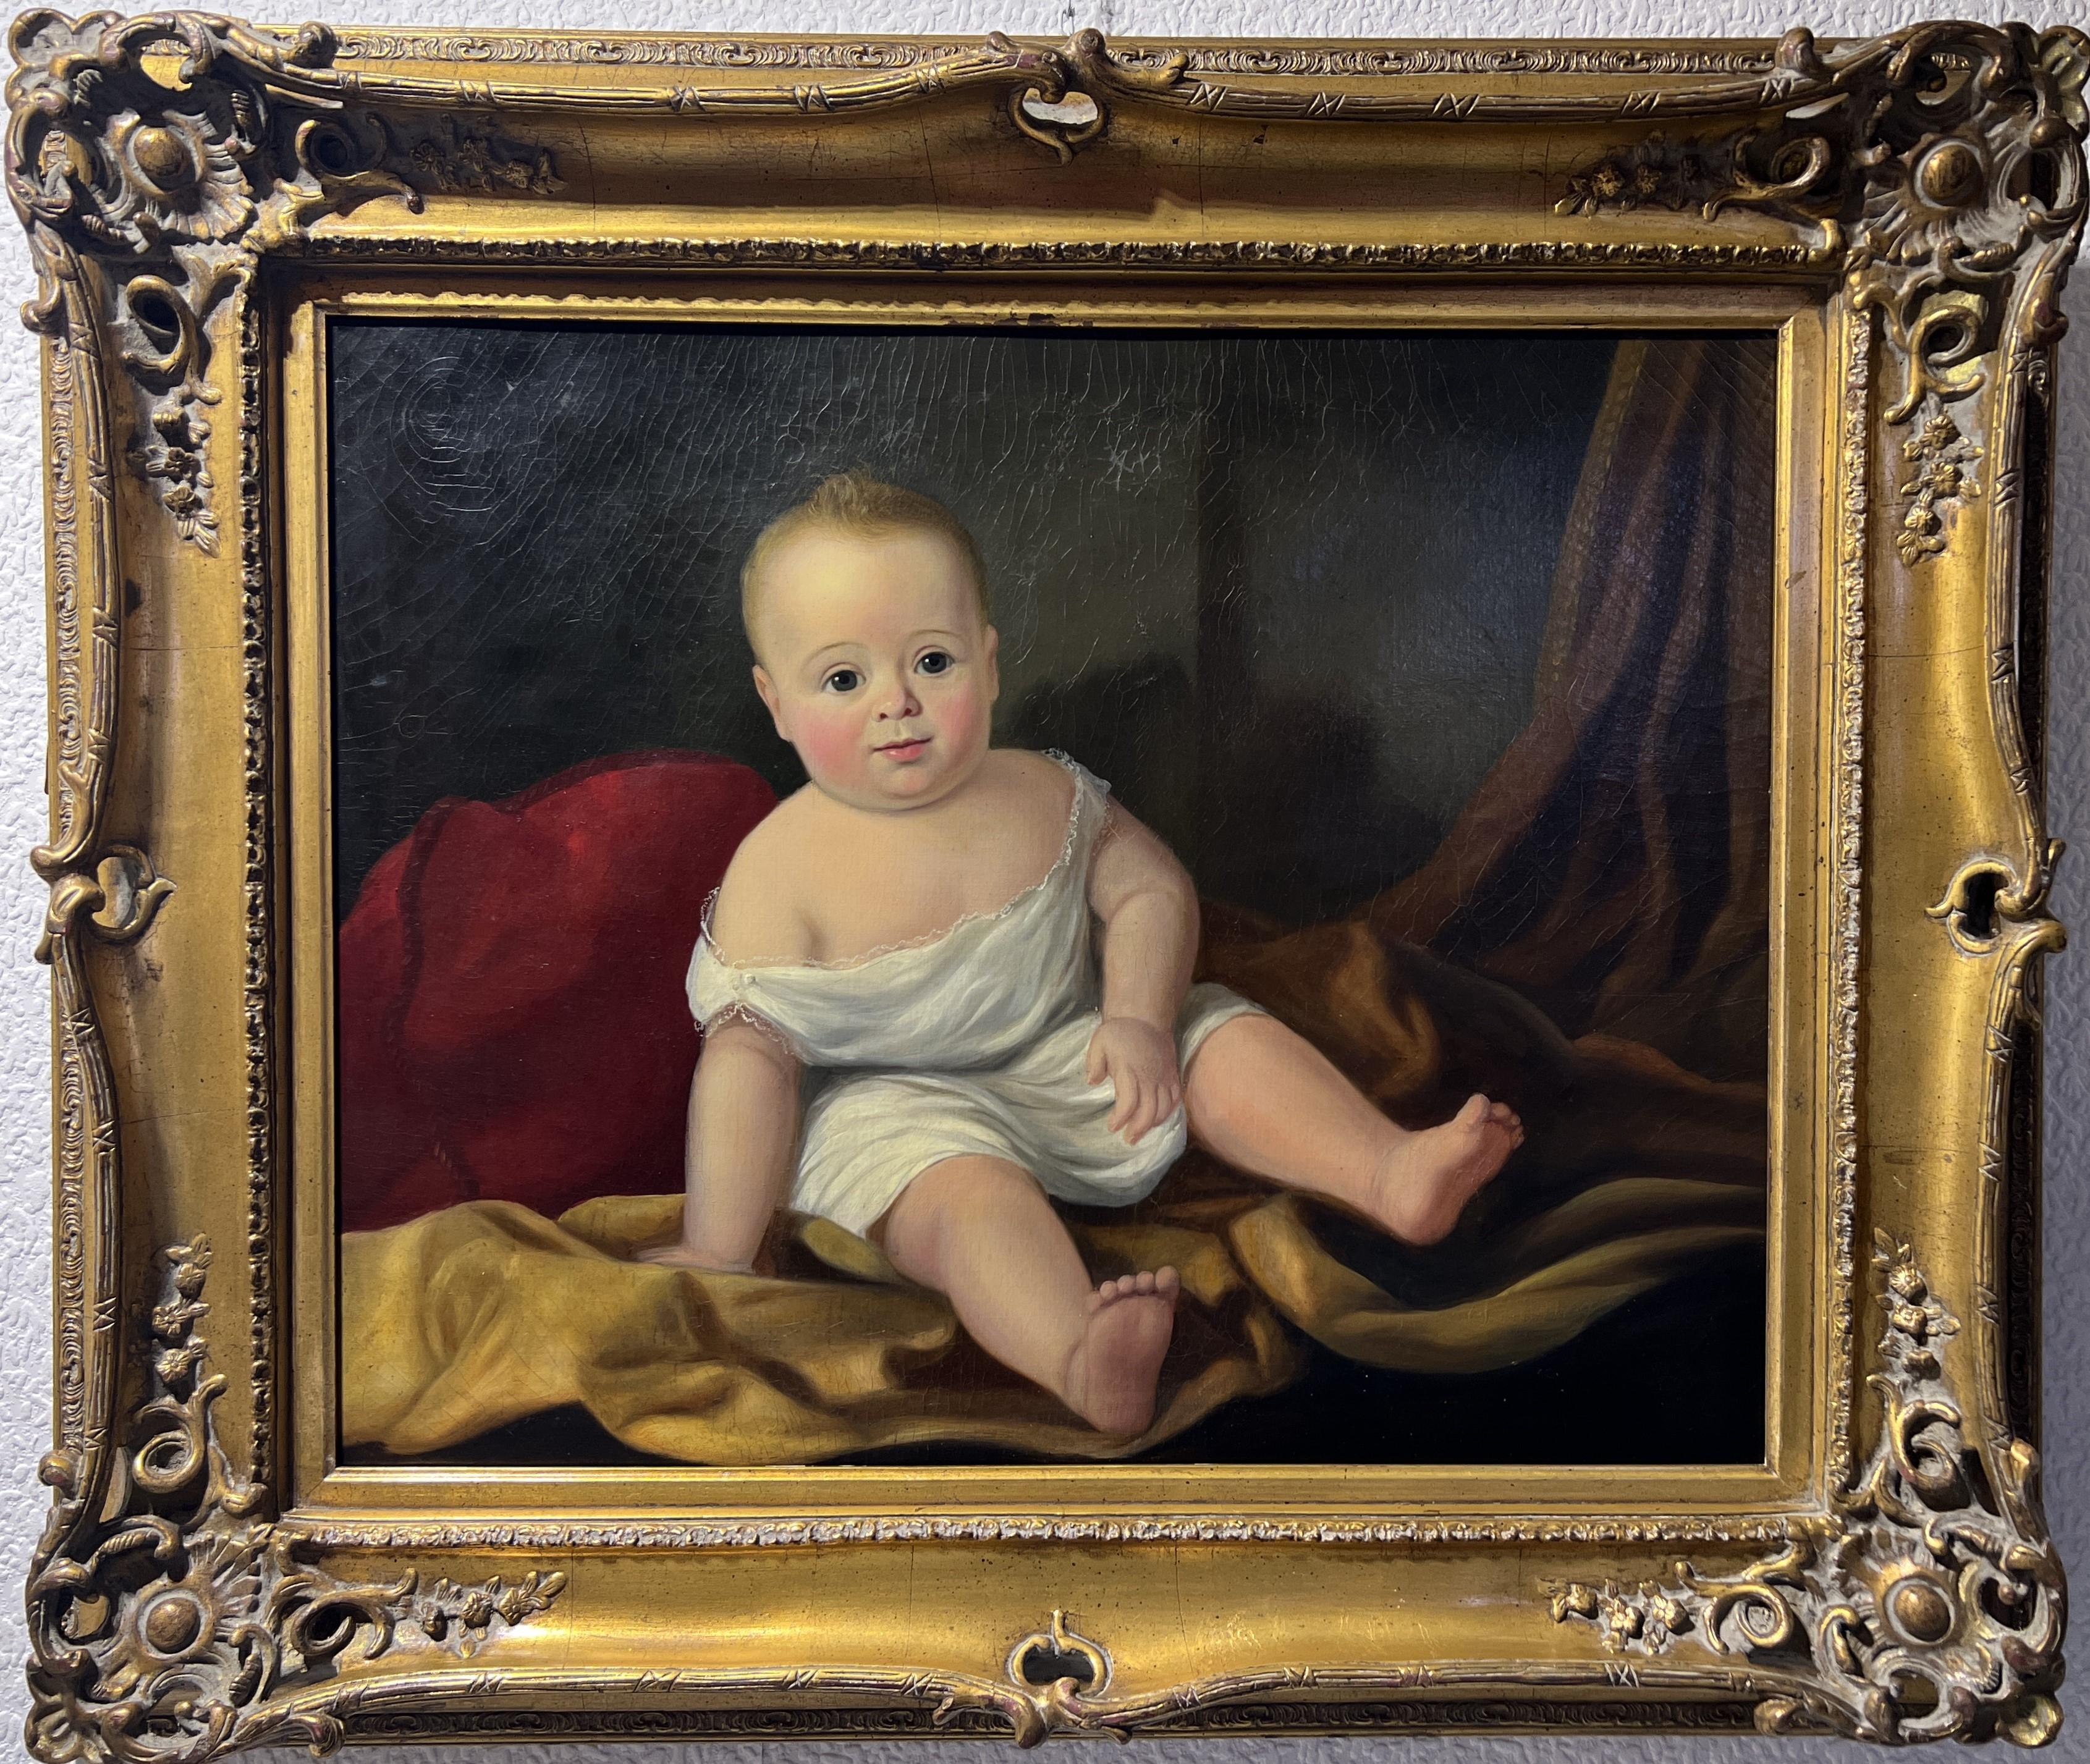 Up for sale is an original antique 1864 oil painting on canvas by Famous American Artist John O'Brien Inman (1828-1896), depicting a portrait of a seated baby. 

Signature on verso "Painted by Jho. O'B Inman Portlana Jan 18th 64"

The painting is in